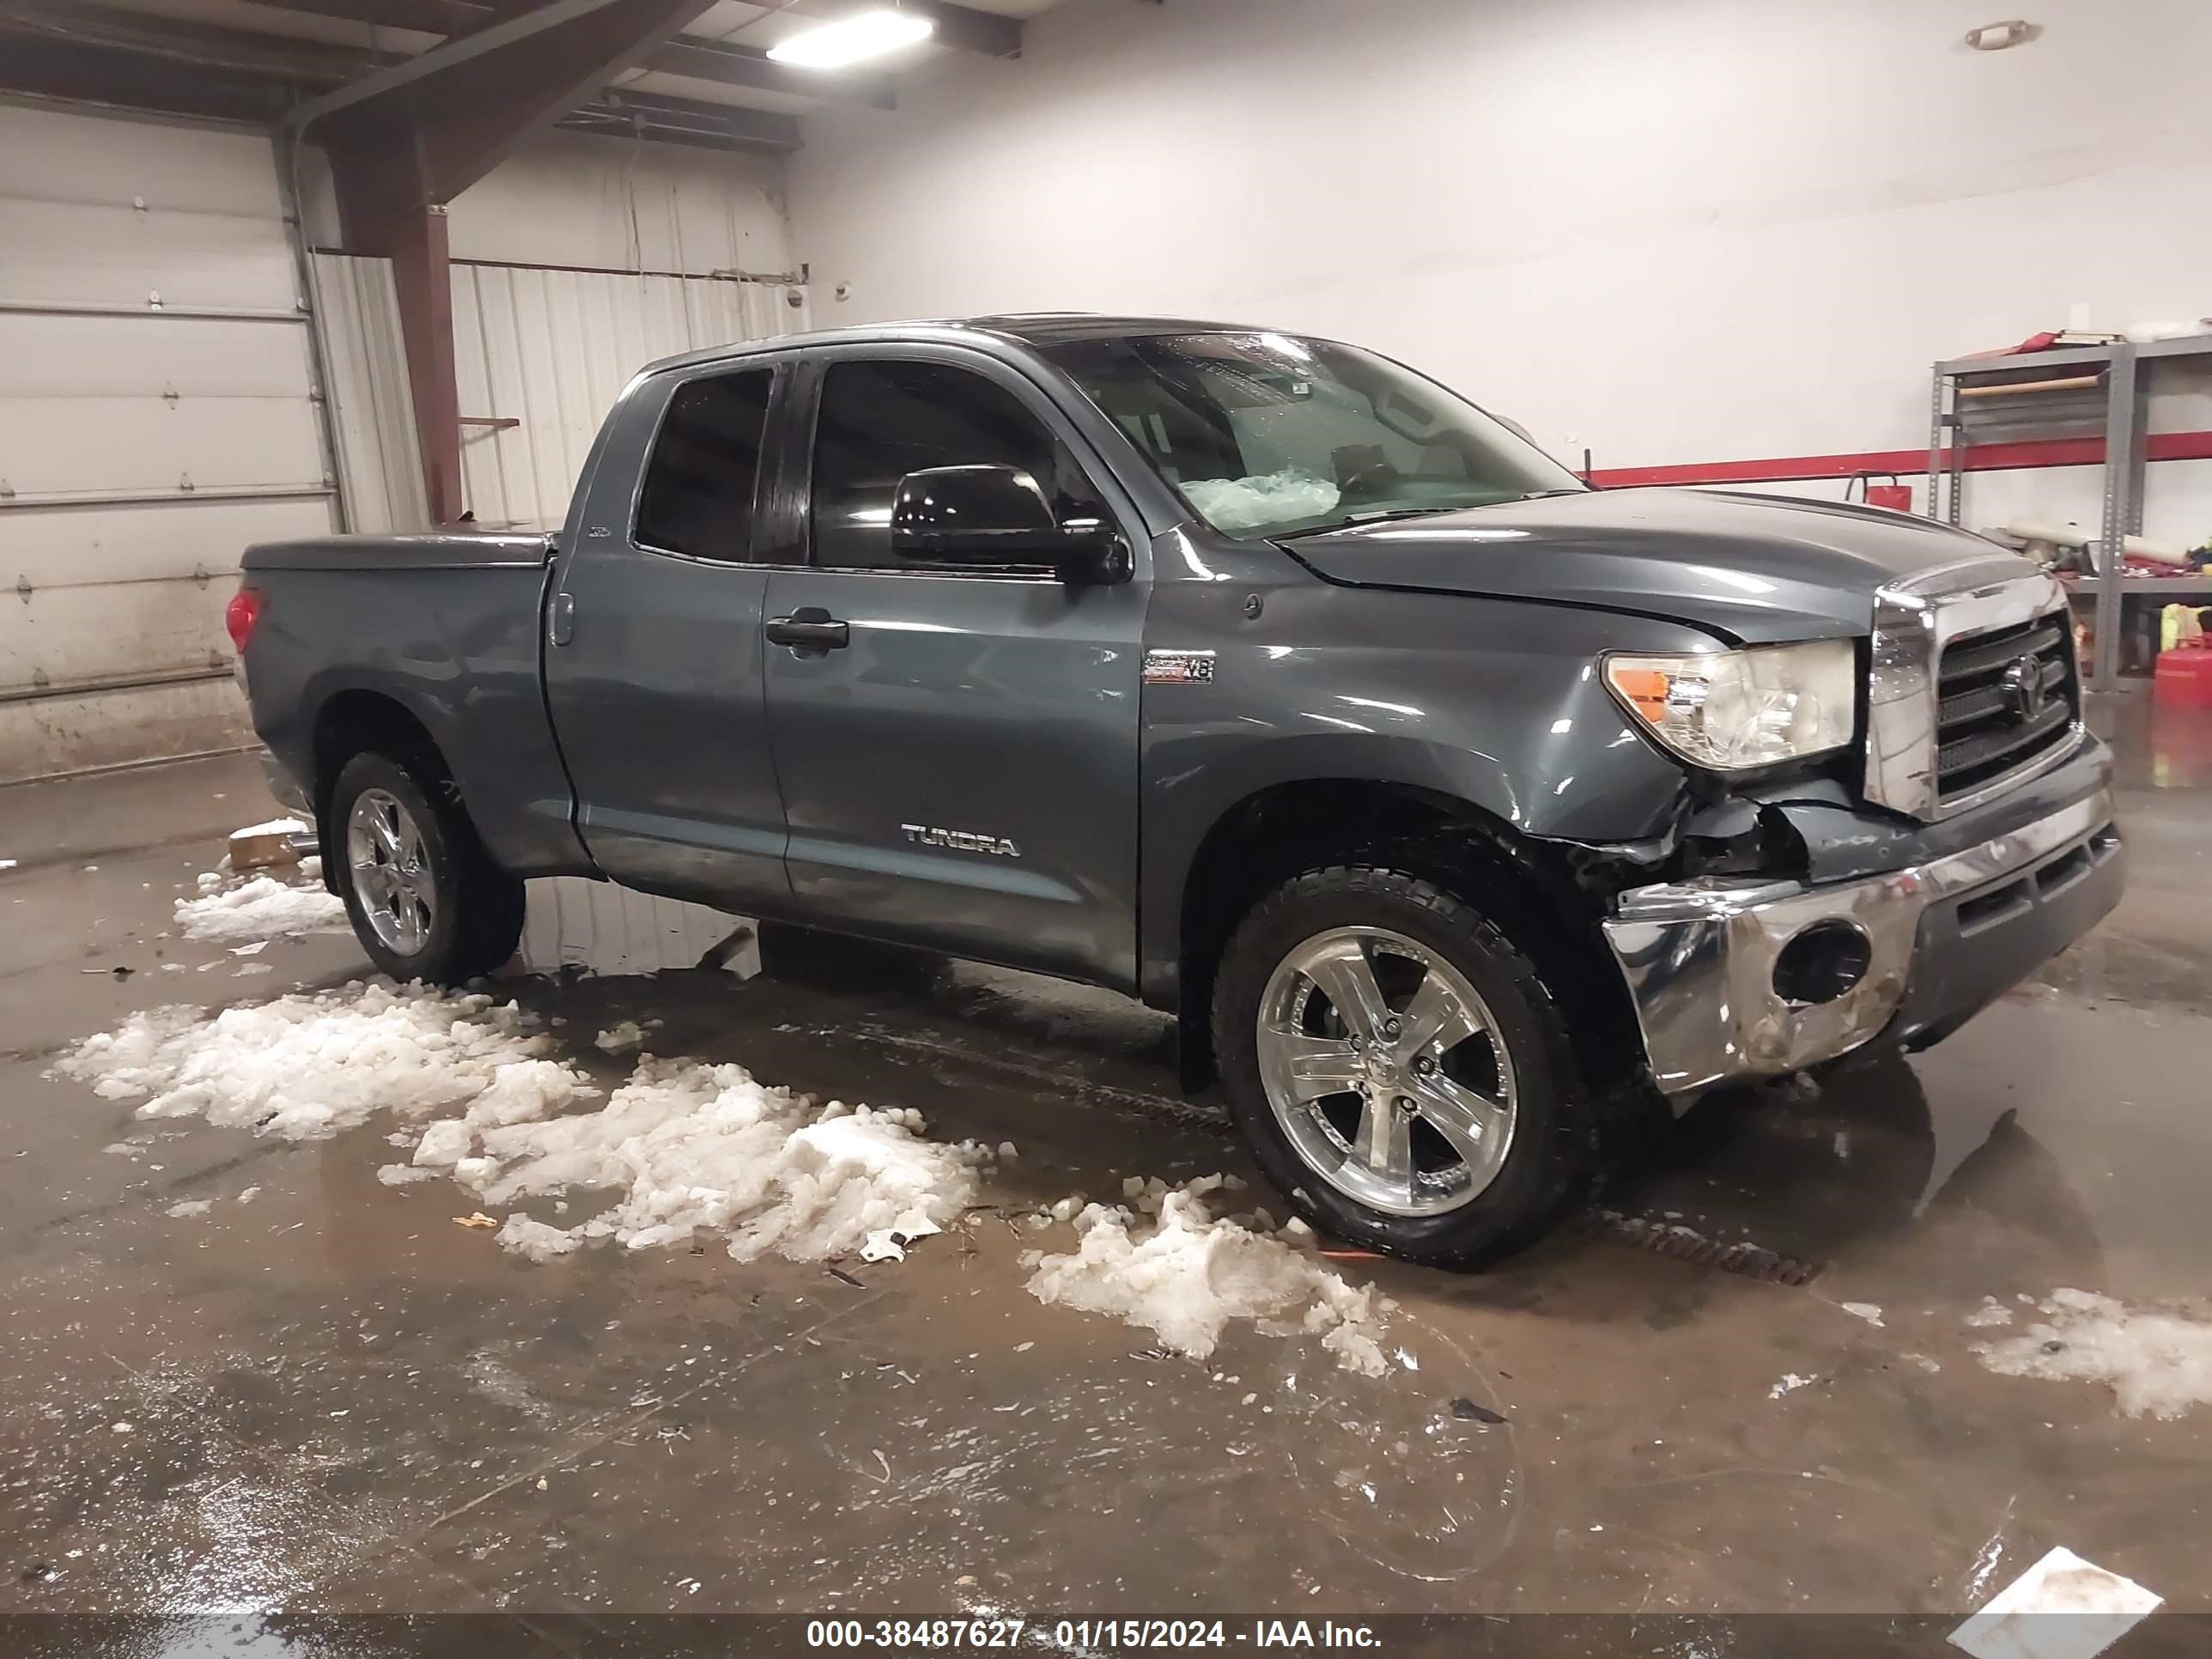 vin: 5TFRV54128X035490 5TFRV54128X035490 2008 toyota tundra 5700 for Sale in 68059, 14749 Meredythe Plz, Springfield, USA